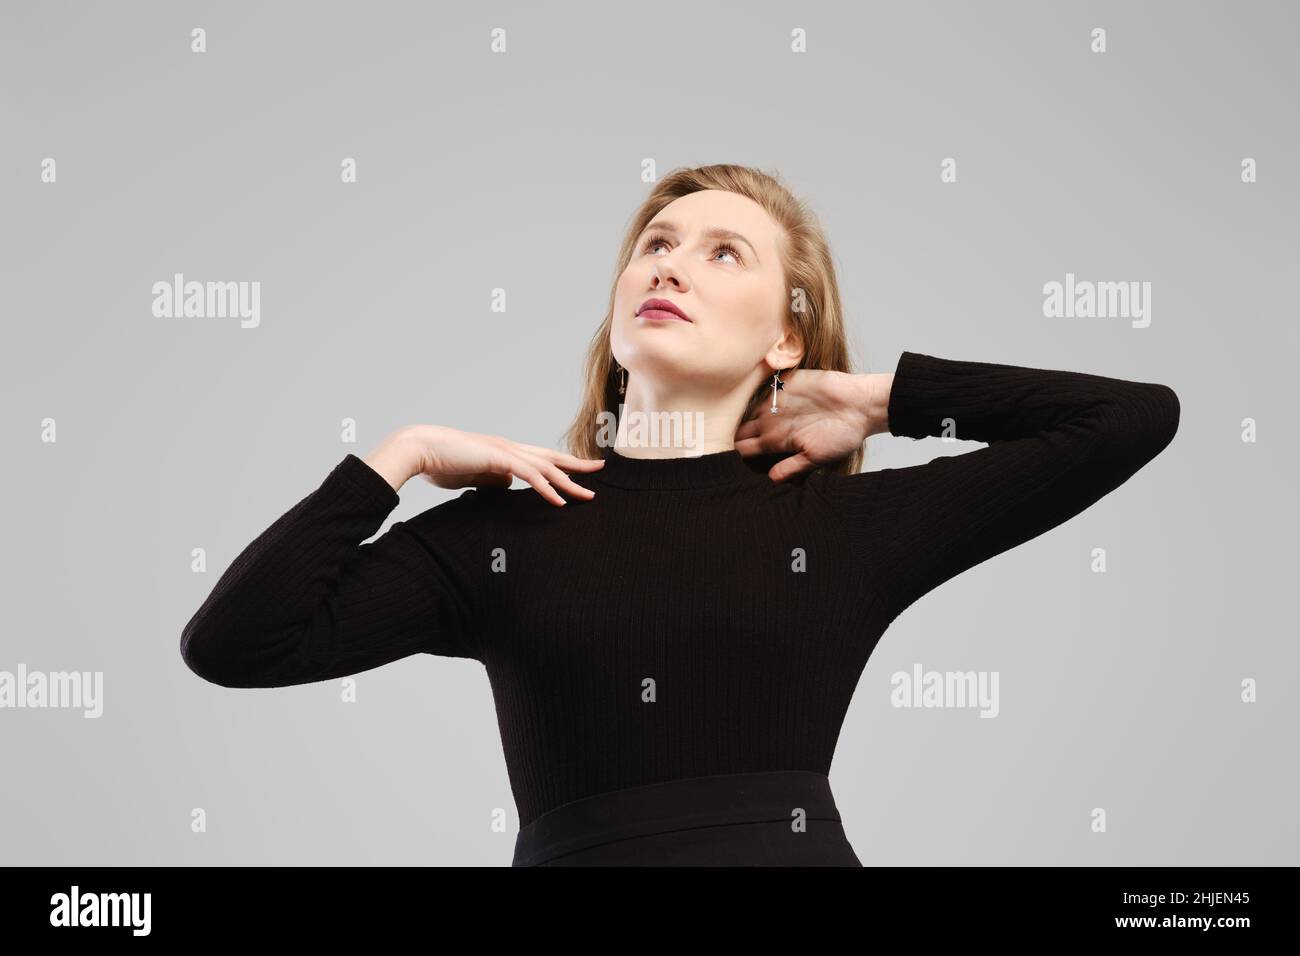 Low angle photo of young woman lifting hands to her shoulders and looking up in studio over grey background Stock Photo